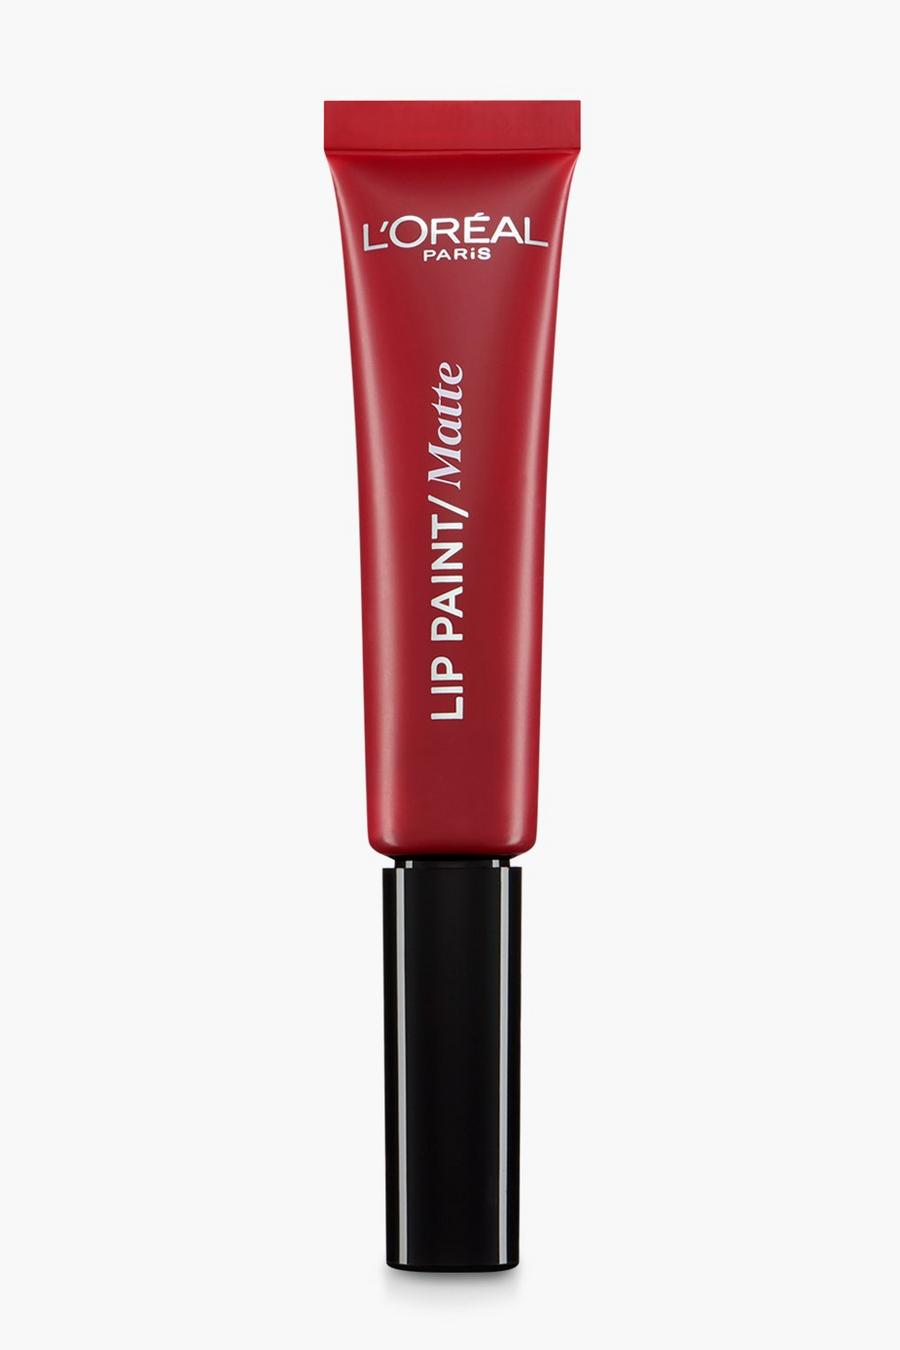 L'Oreal Infall Lip Paint- Apocalypse Red 205